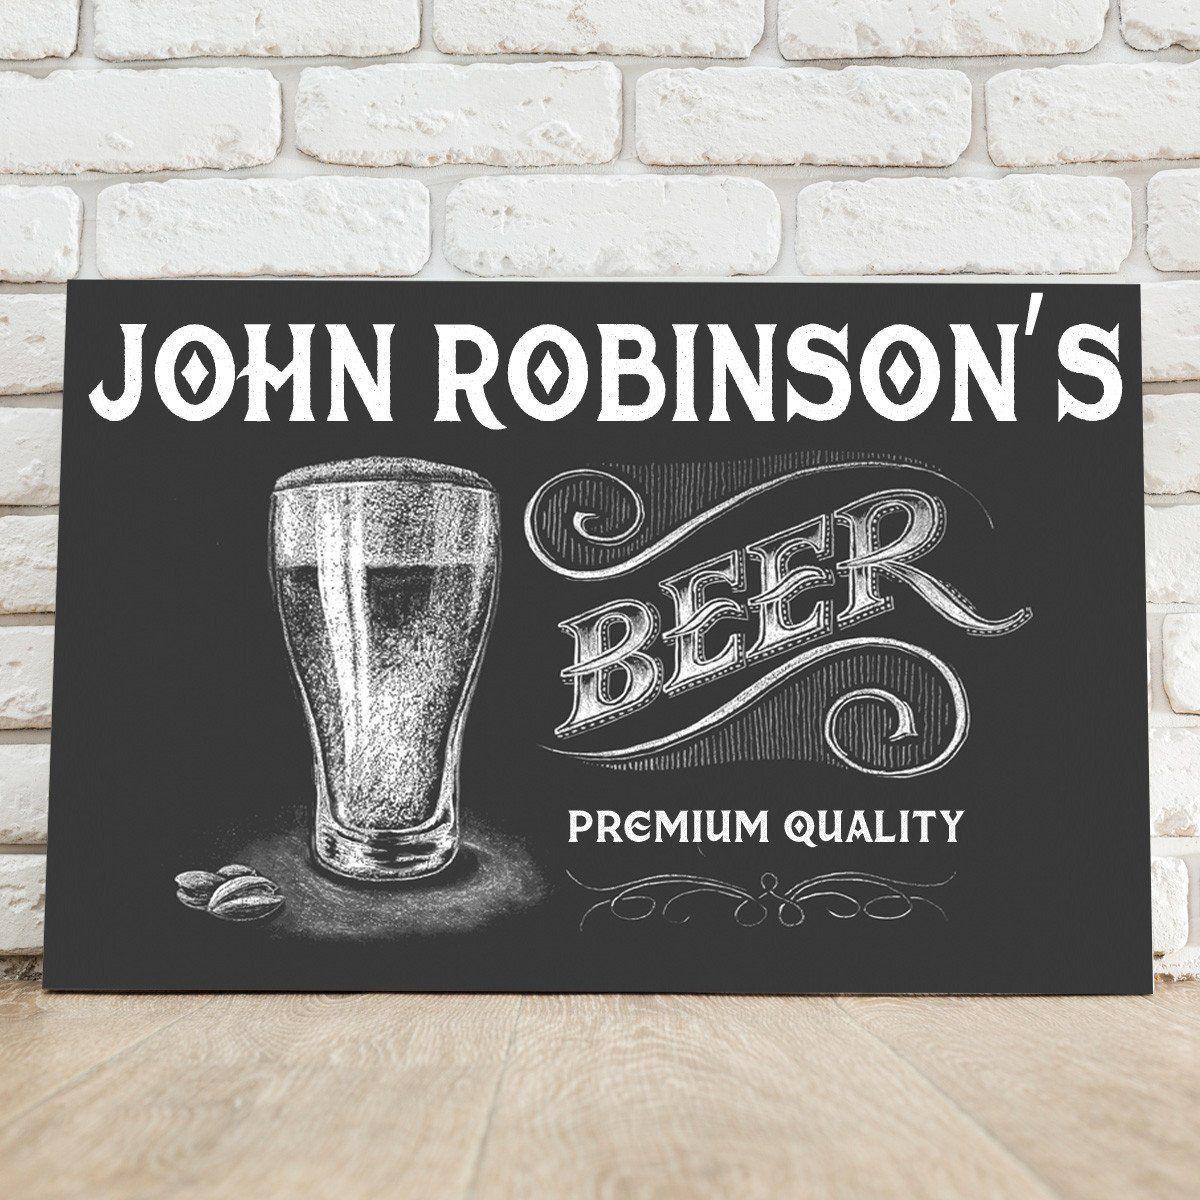 Personalized Premium Beer Canvas Sign